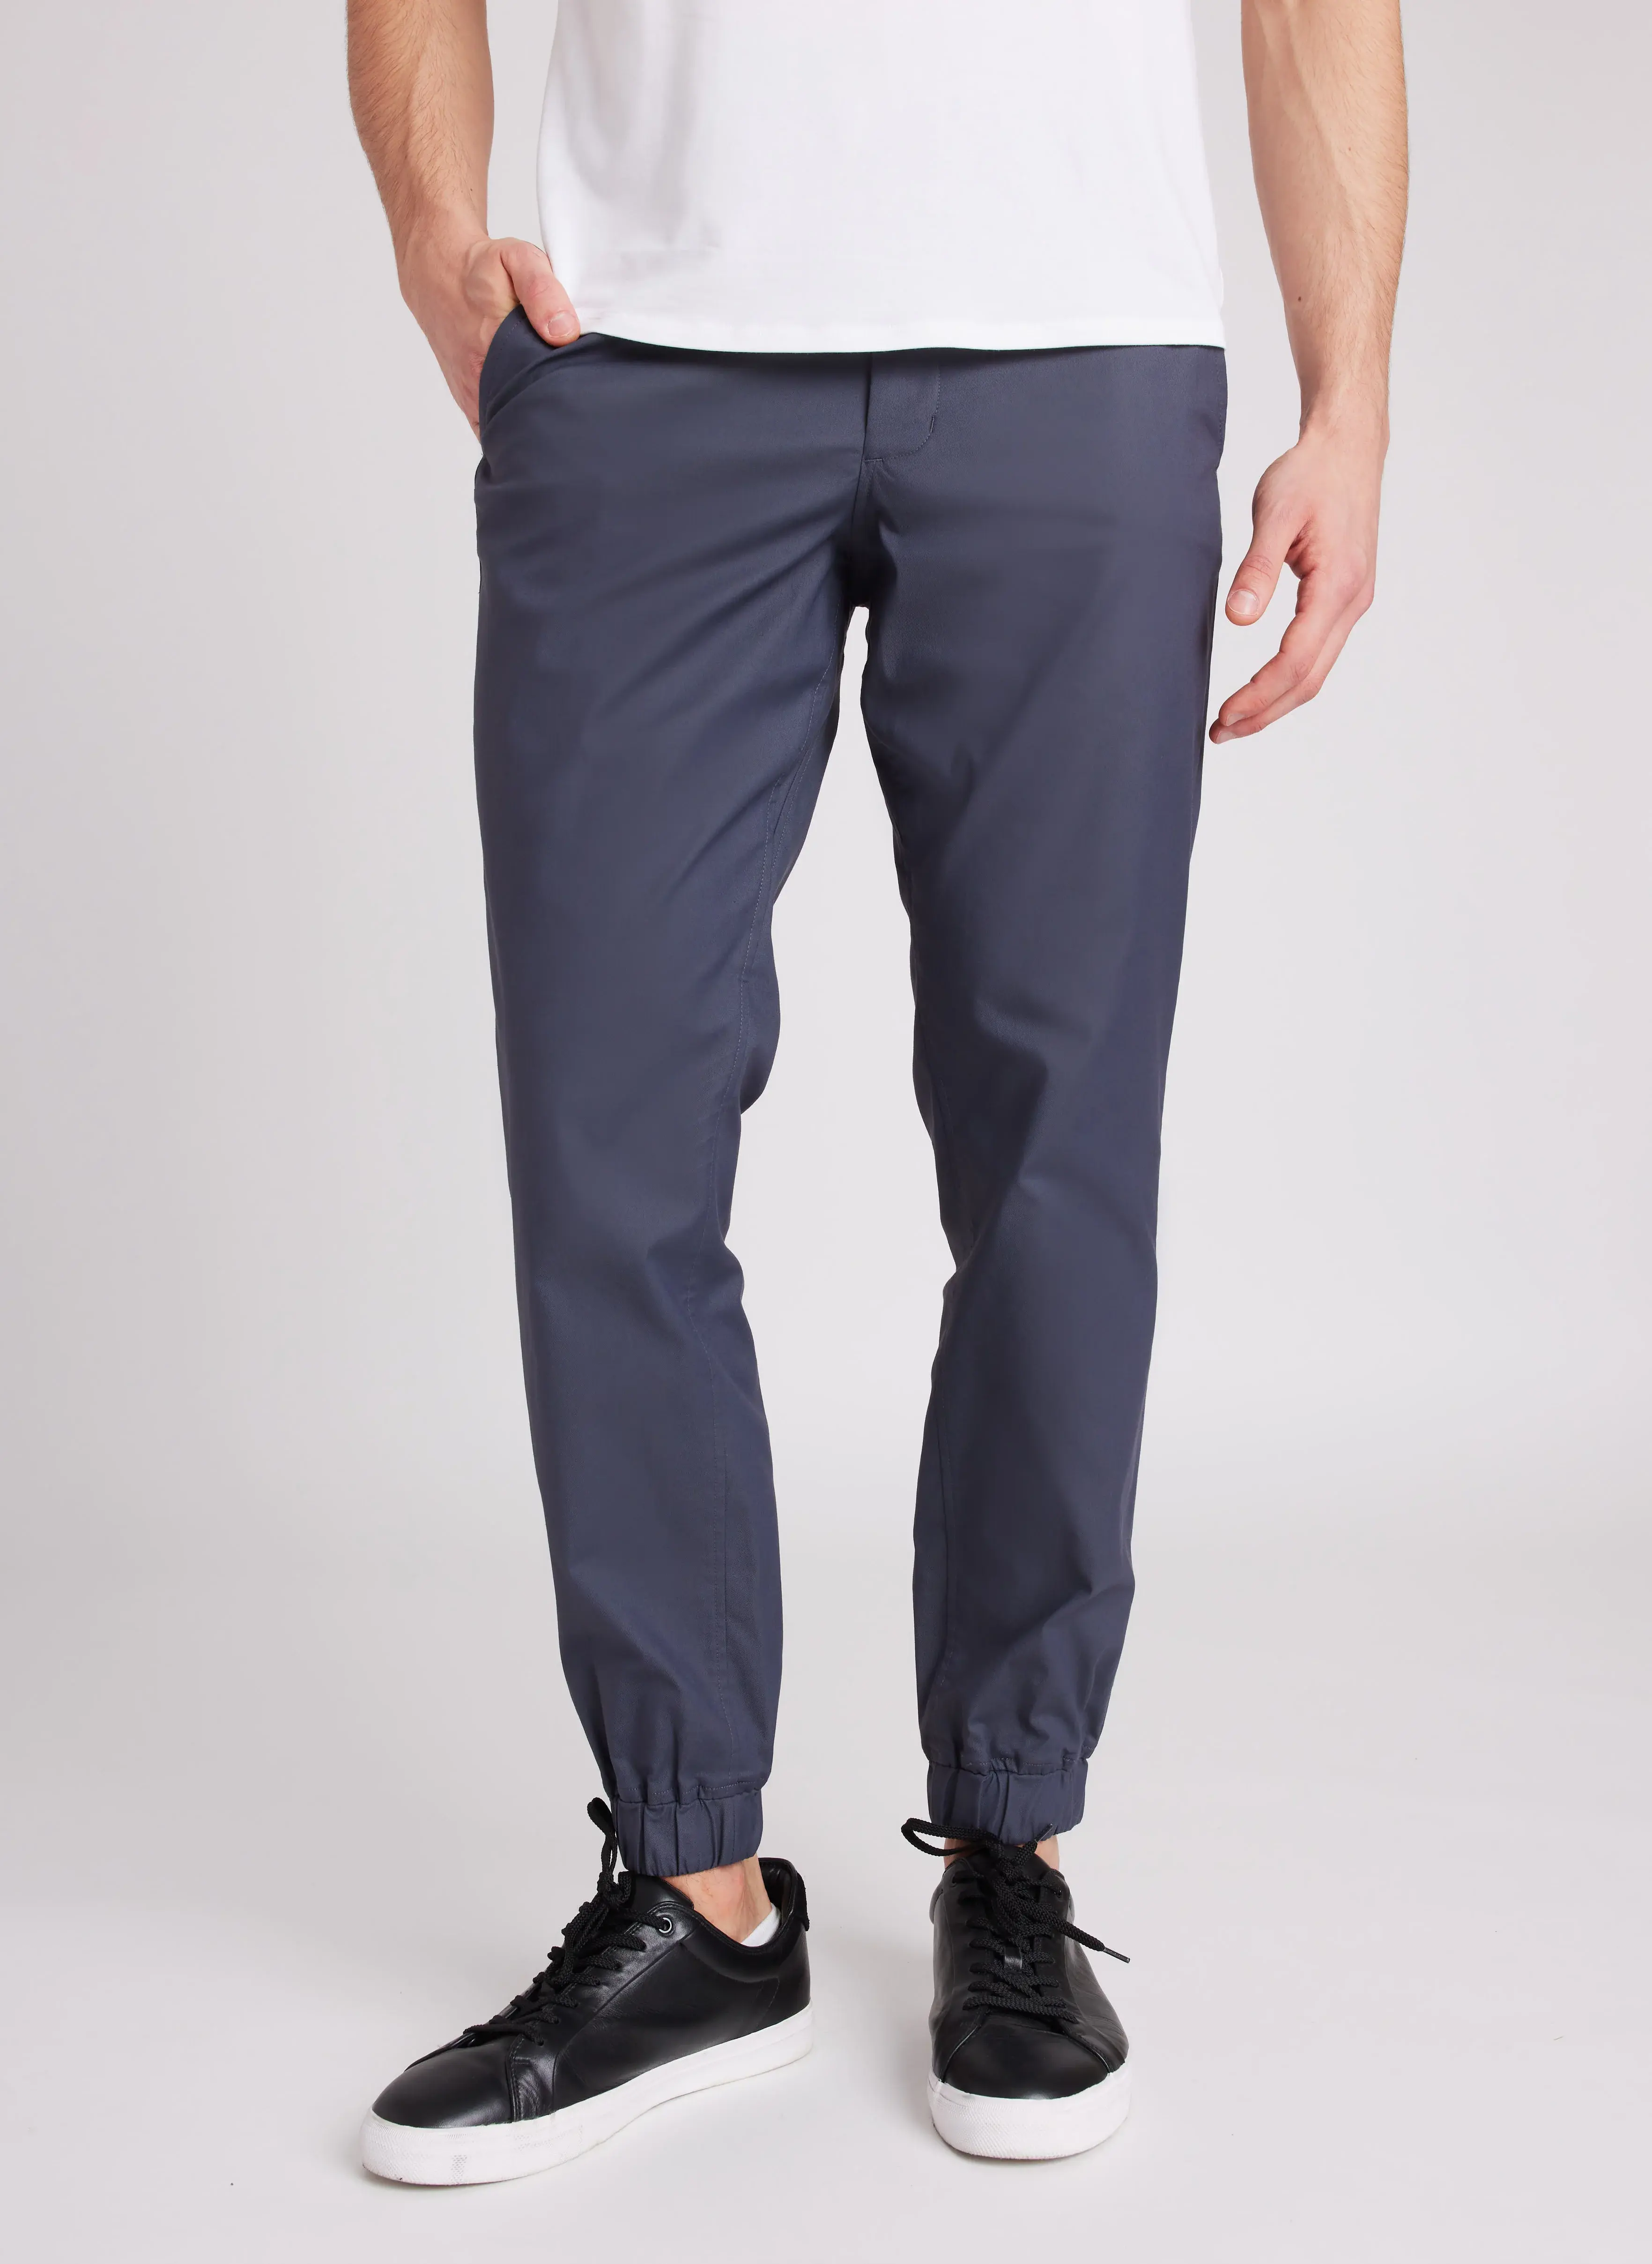 Kit And Ace Navigator Commute Joggers Slim Fit. 1